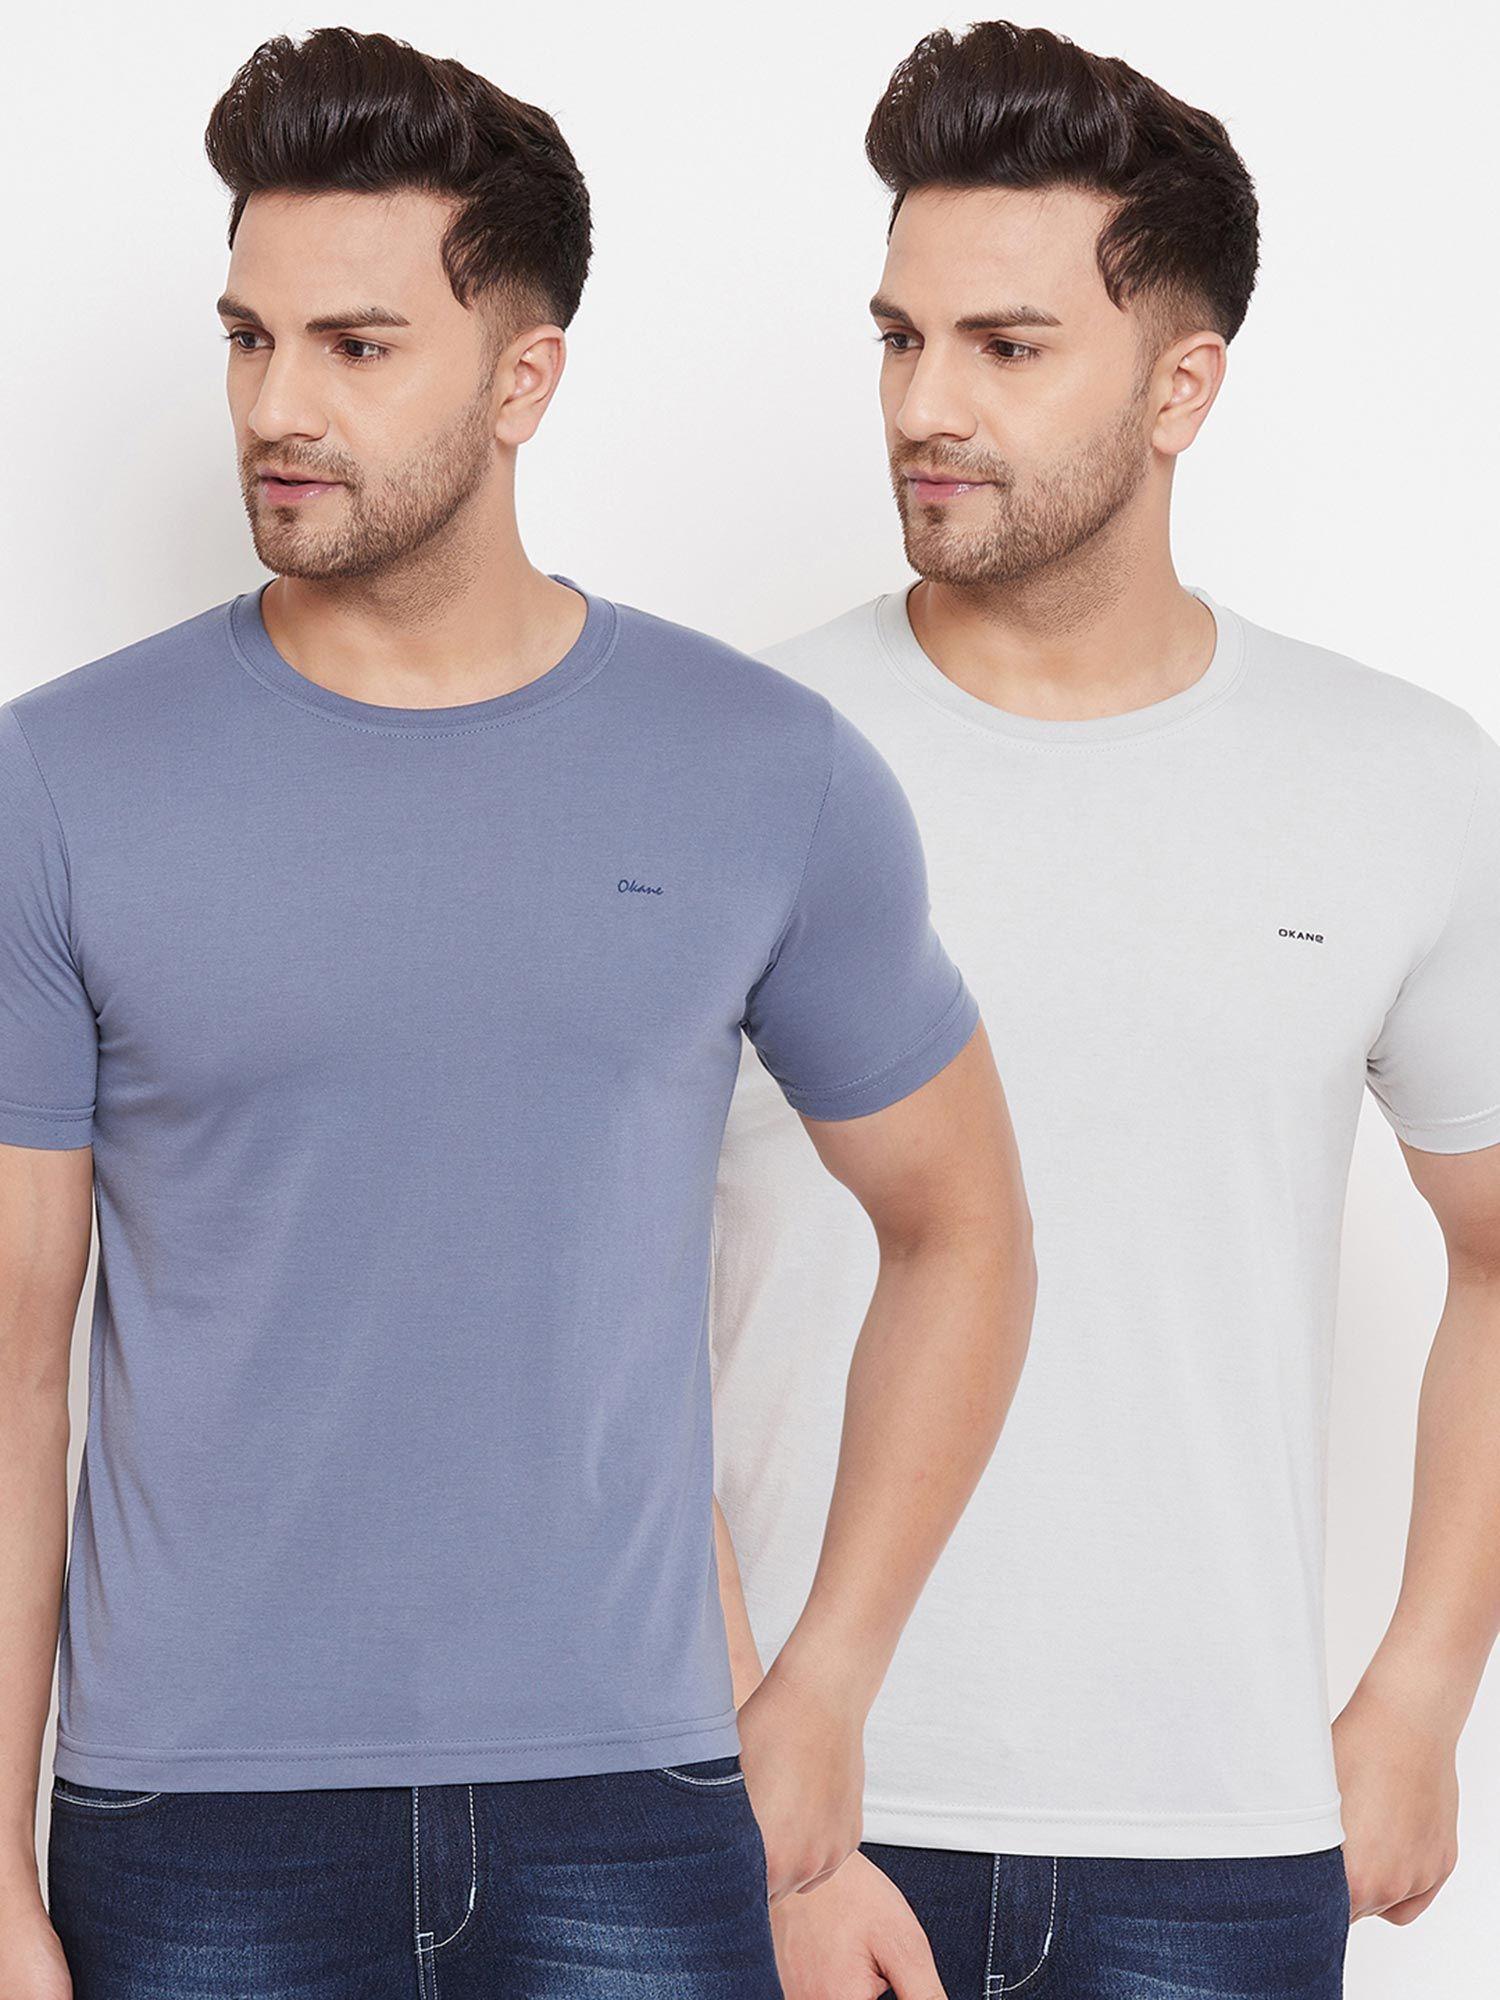 men solid polycotton crew neck t-shirt (pack of 2)